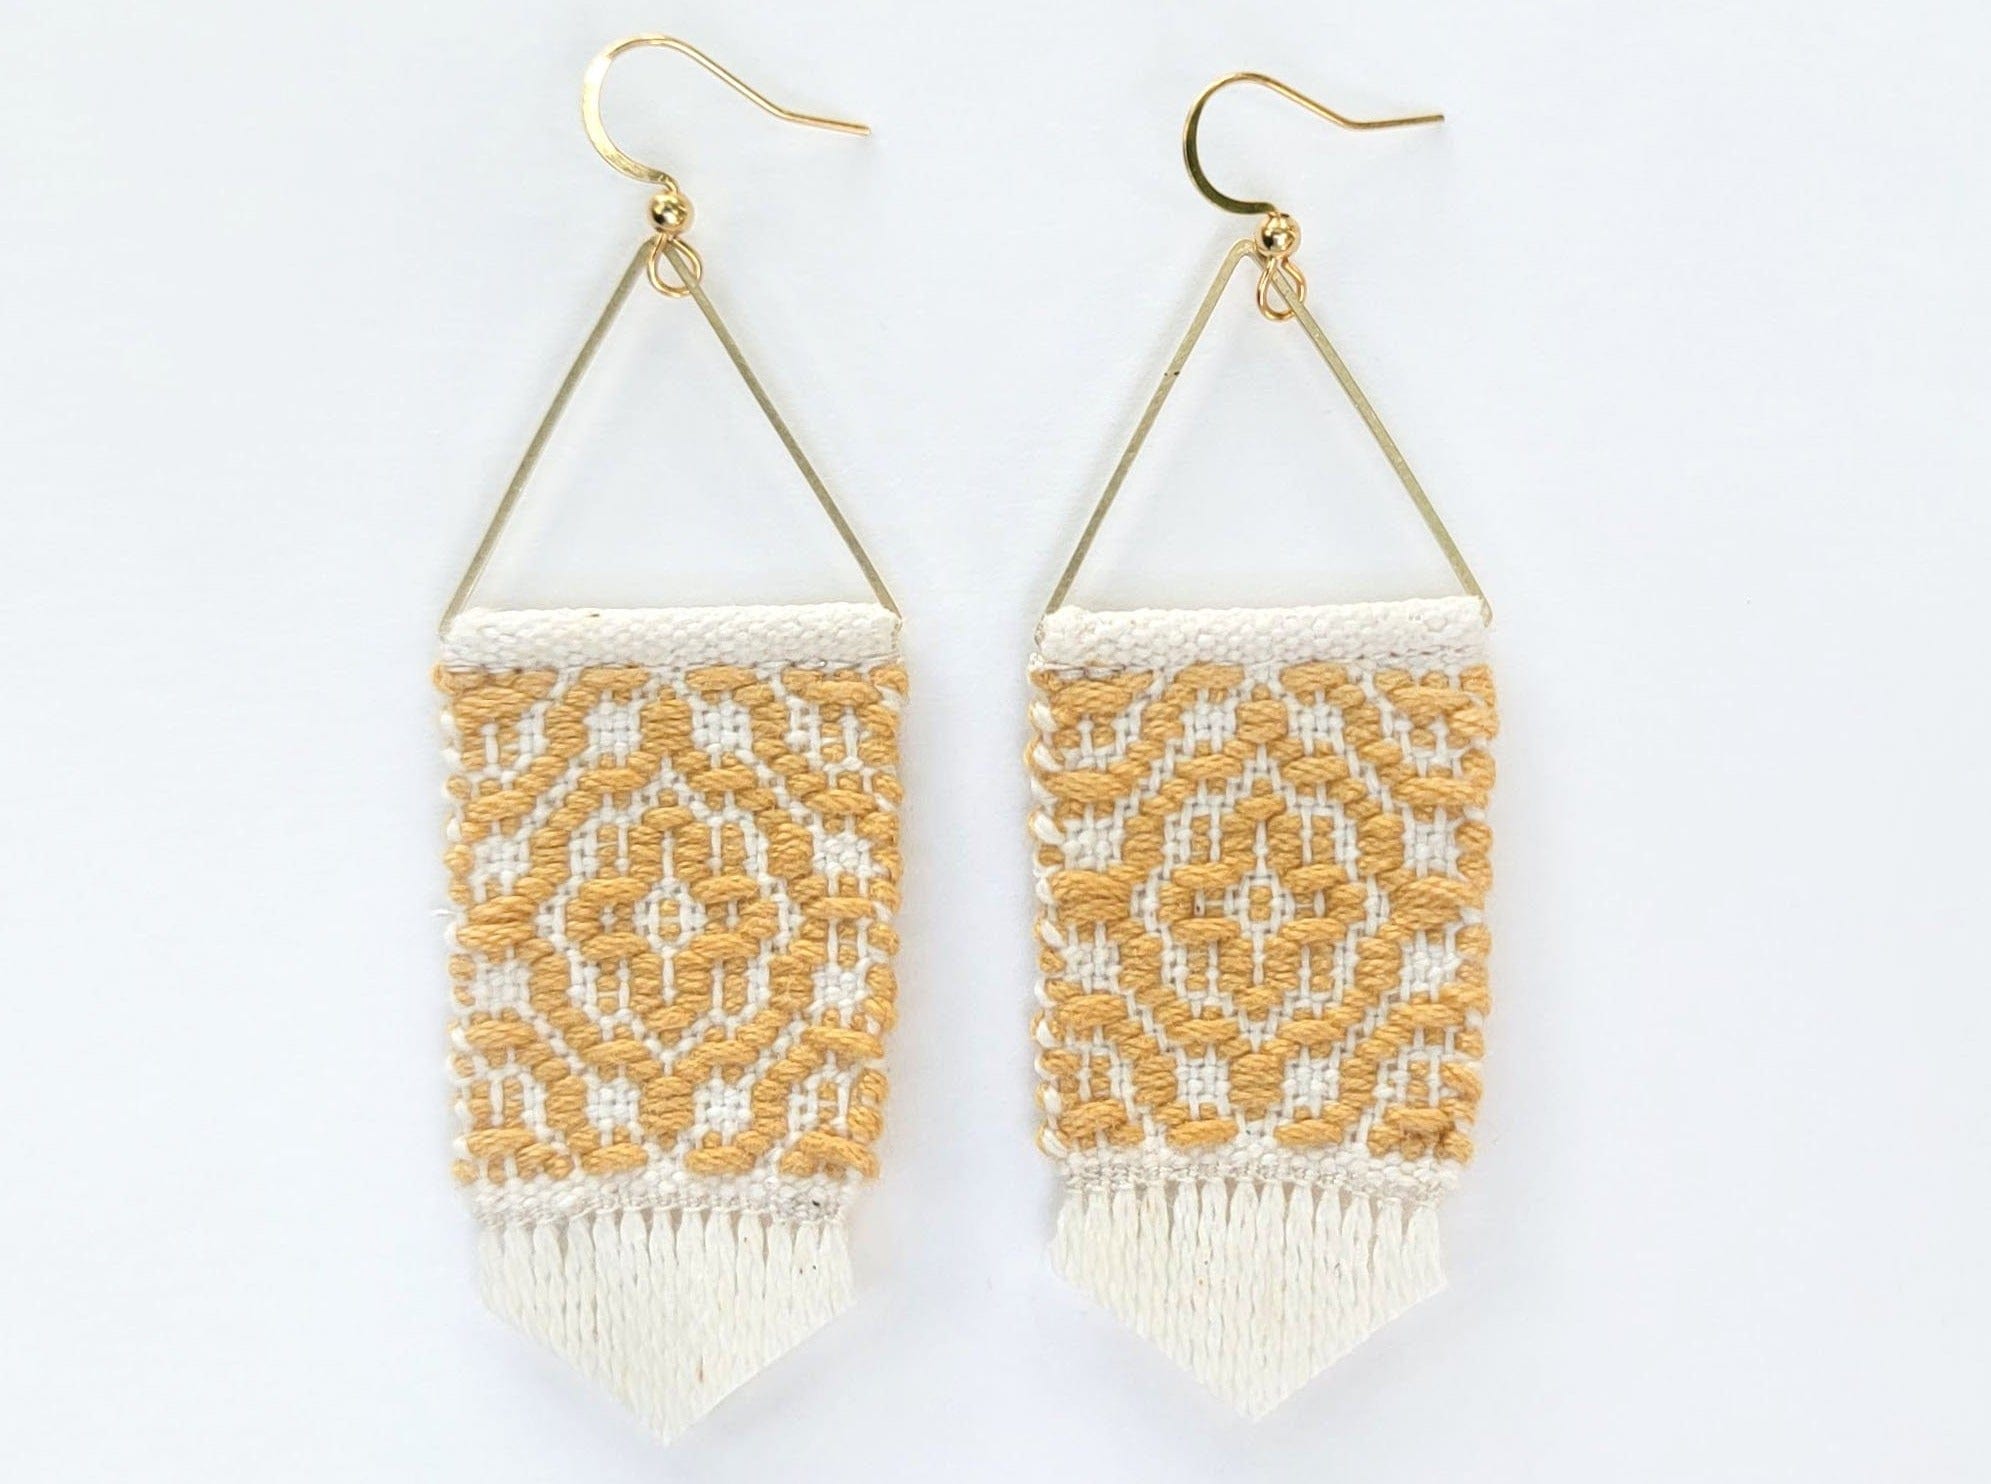 DF - Darcy Fabre Darcy Fabre Trellis Earrings - Little Miss Muffin Children & Home